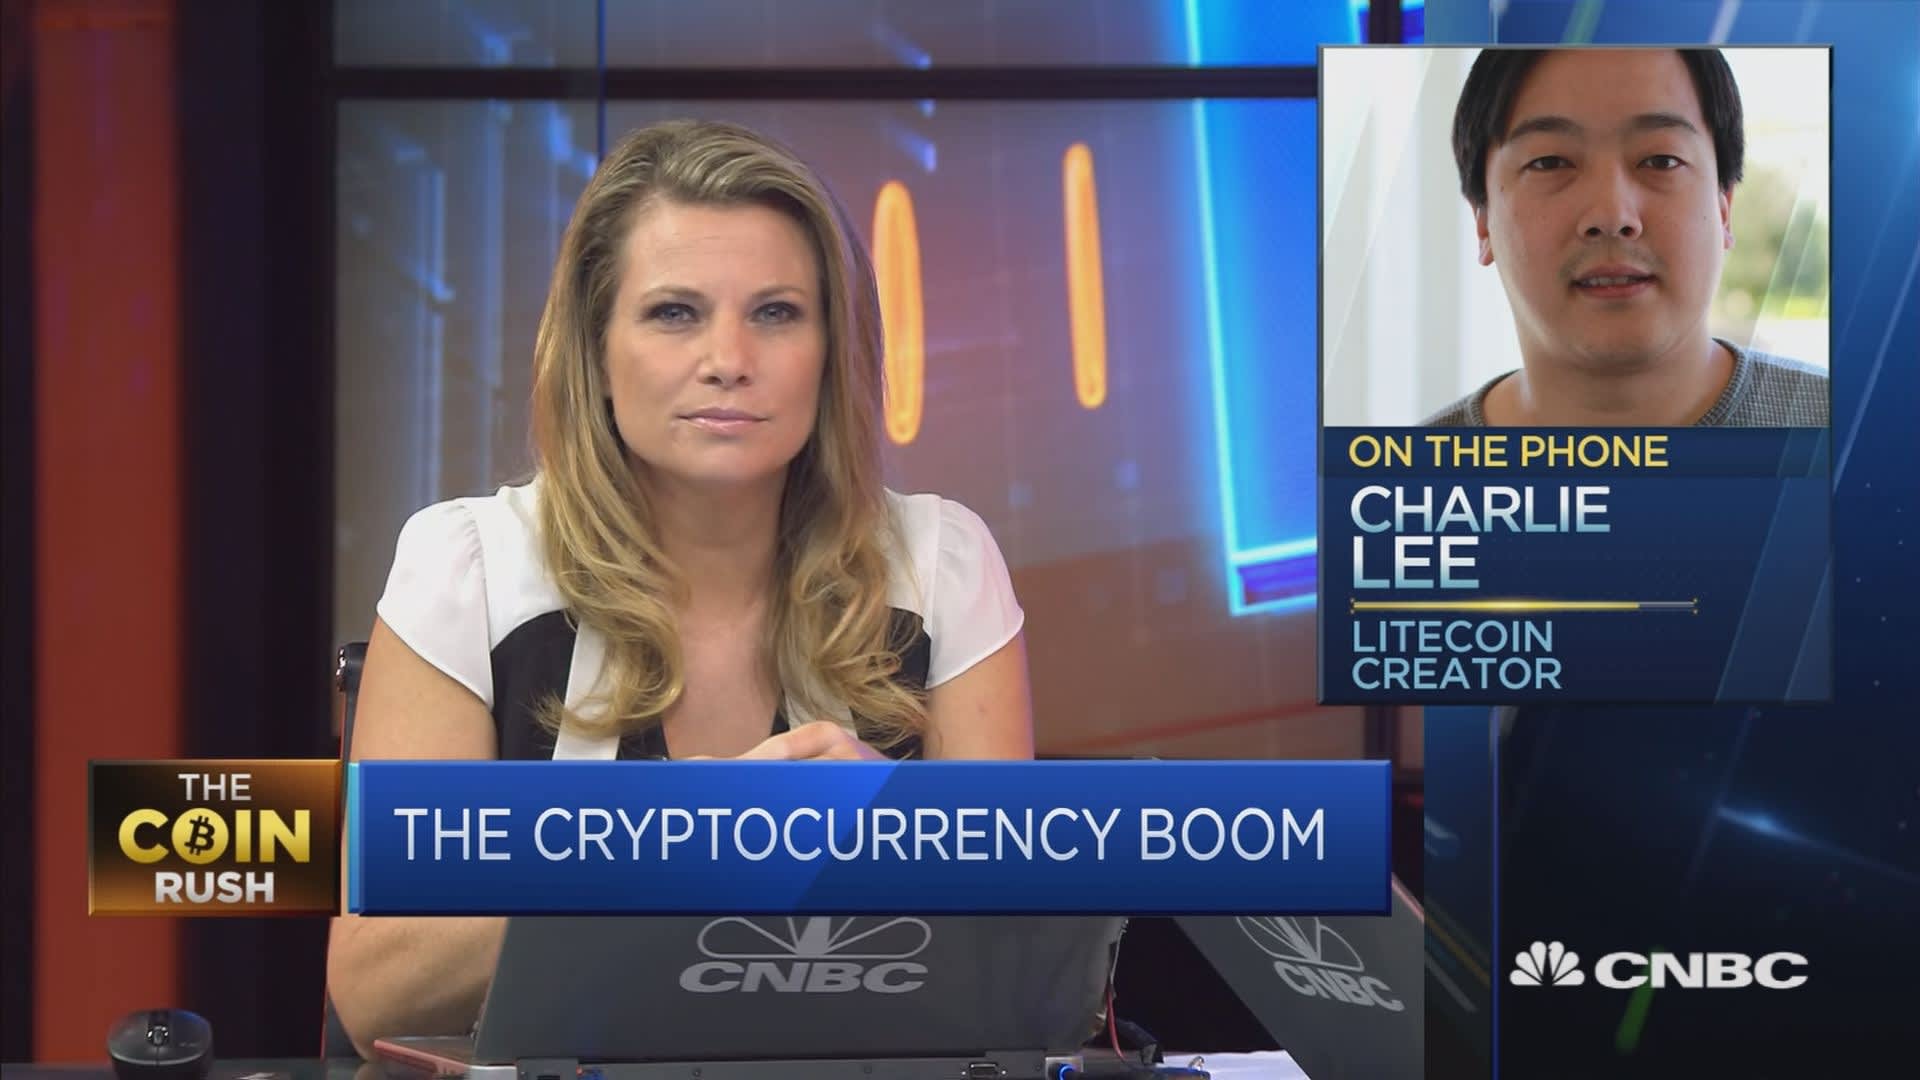 Who Is Charlie Lee? What Is Litecoin?